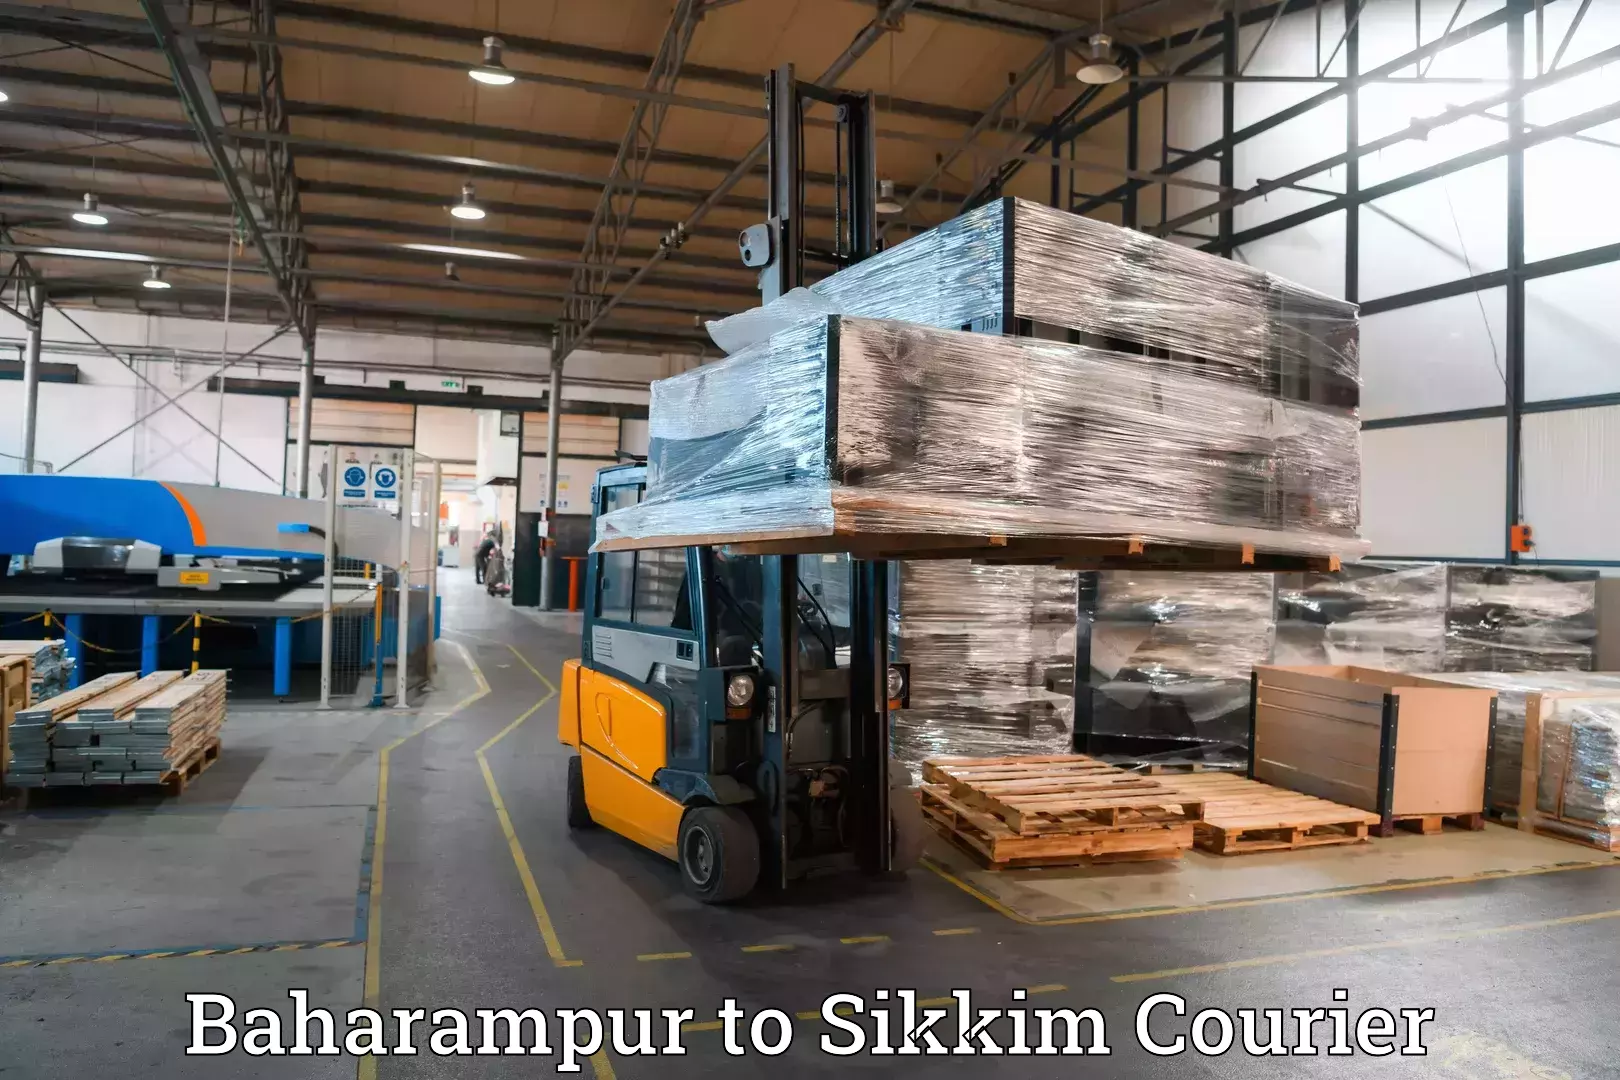 Baggage shipping experts Baharampur to Pelling